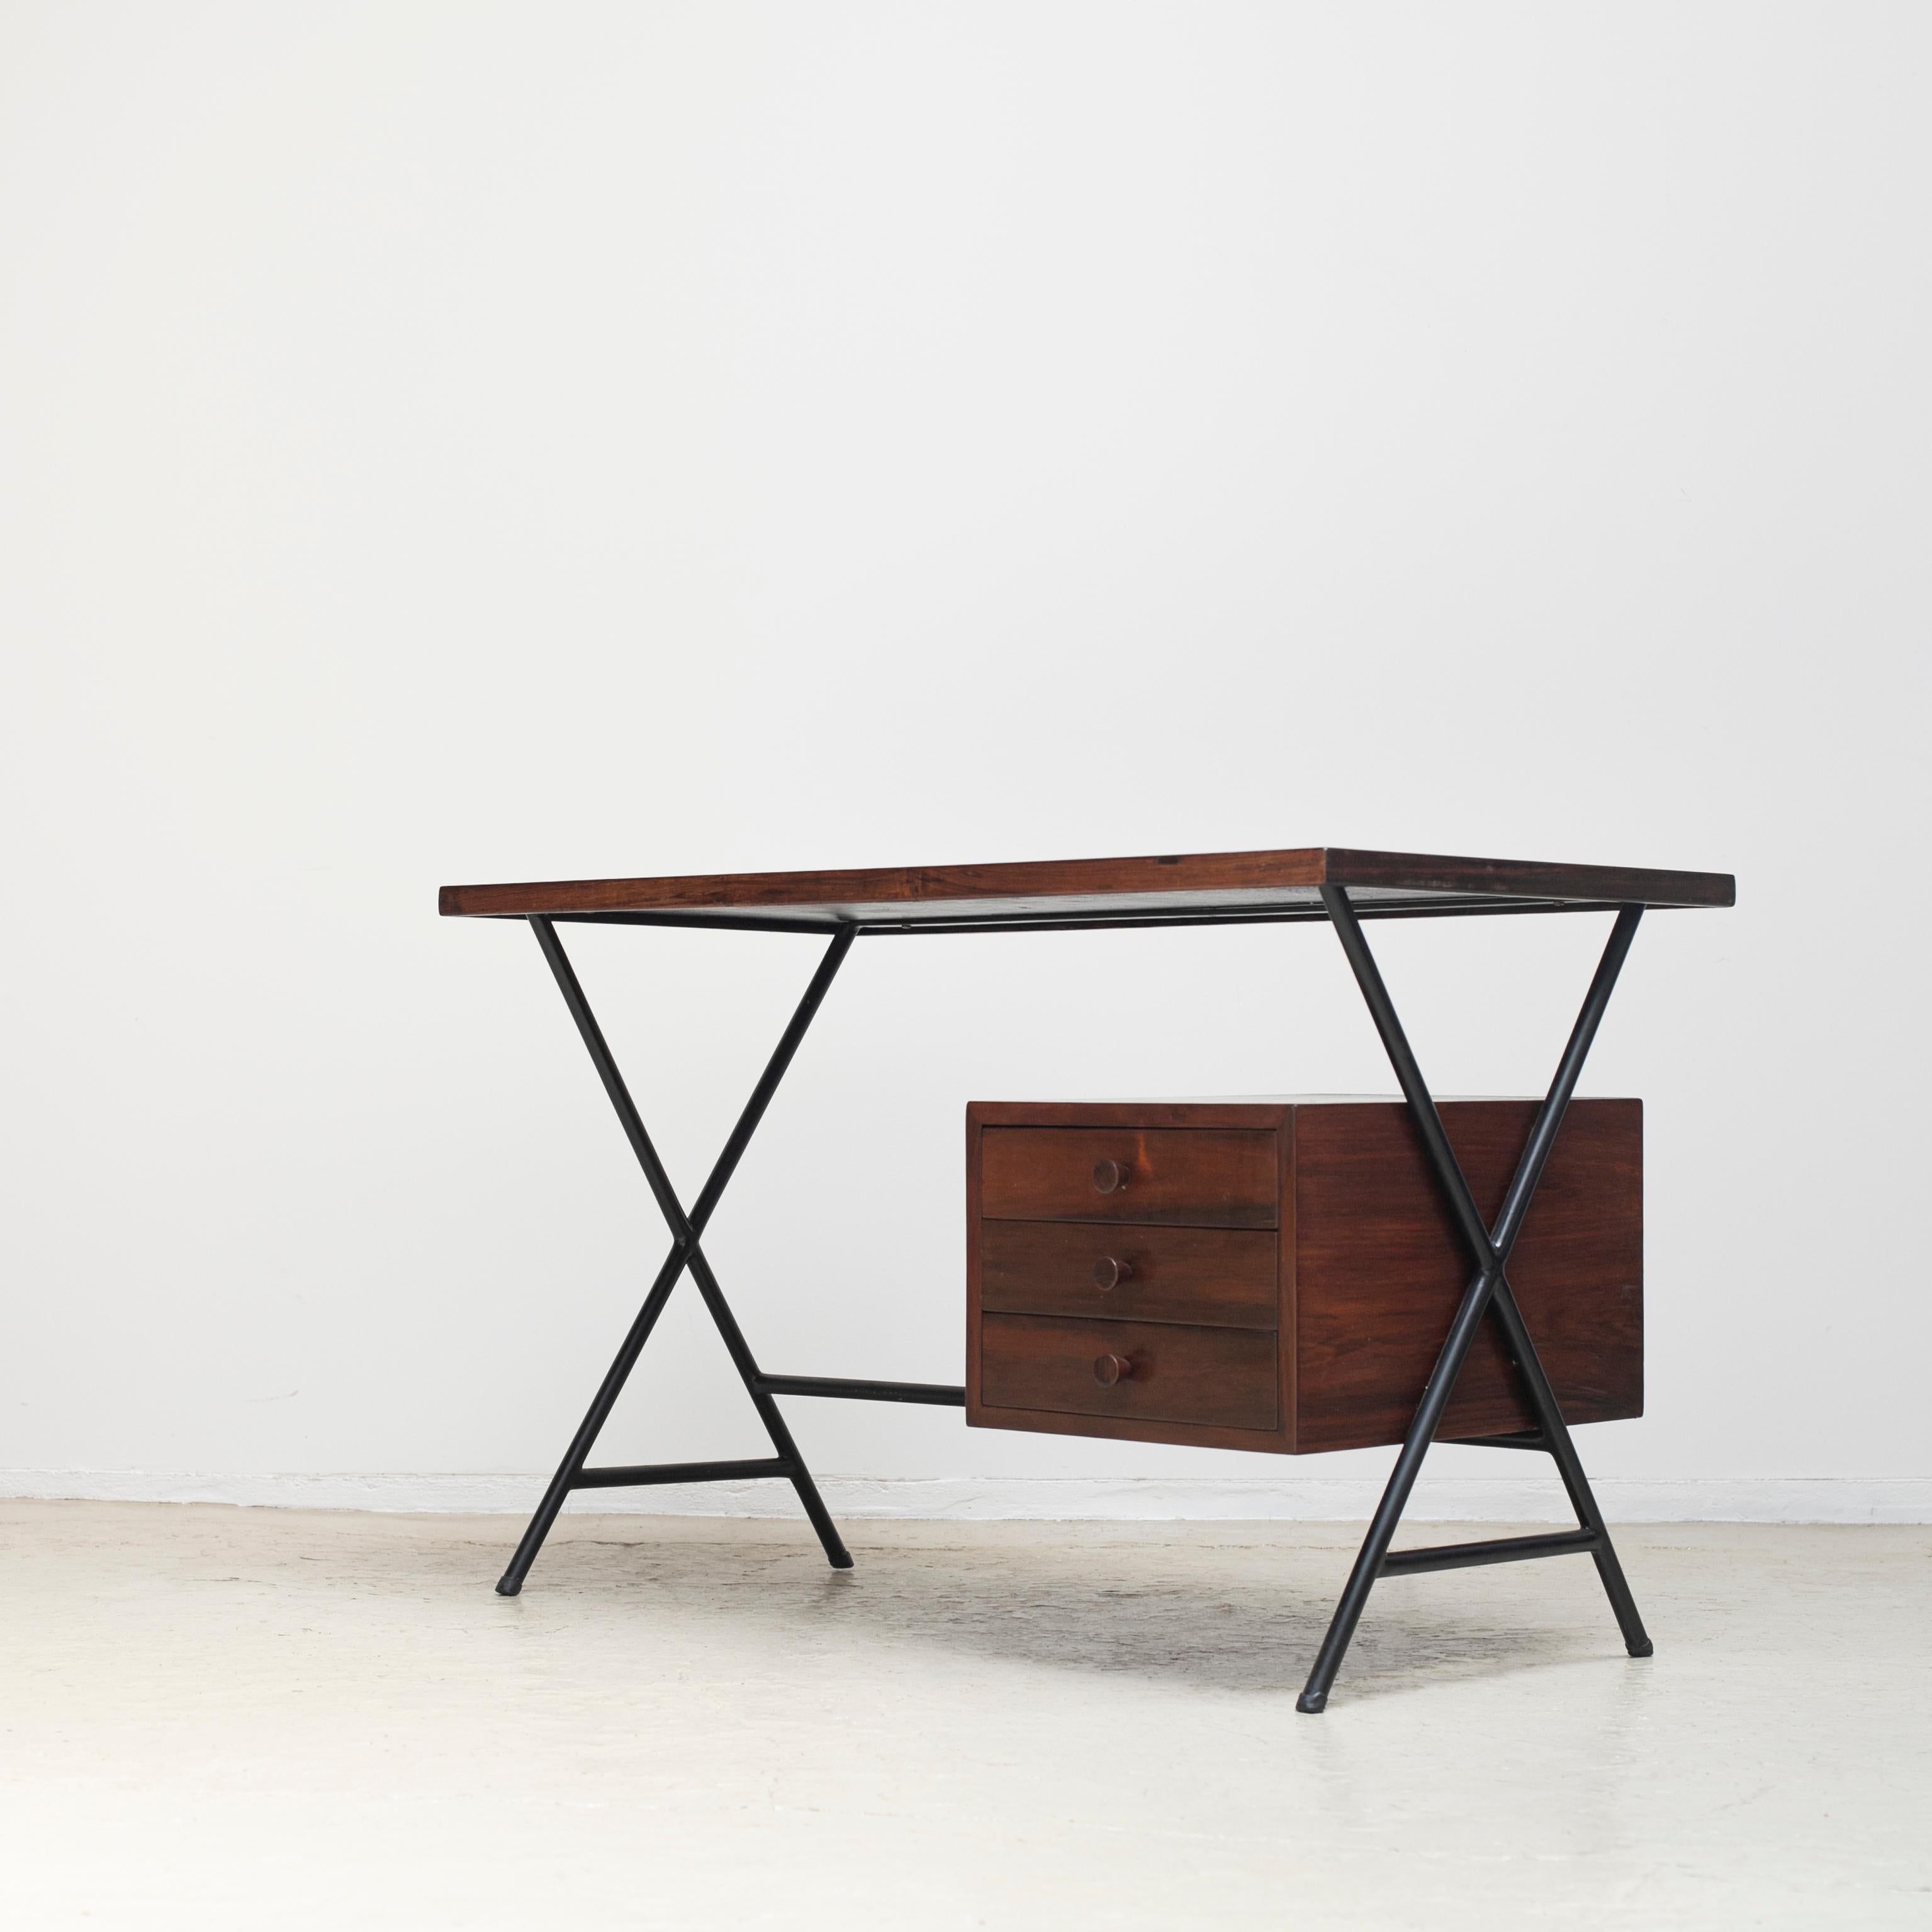 Writing desk designed by Lina Bo Bardi and Giancarlo Palanti for Studio d'Arte Parma in 1949.
Made with rosewood and lacquered steel.